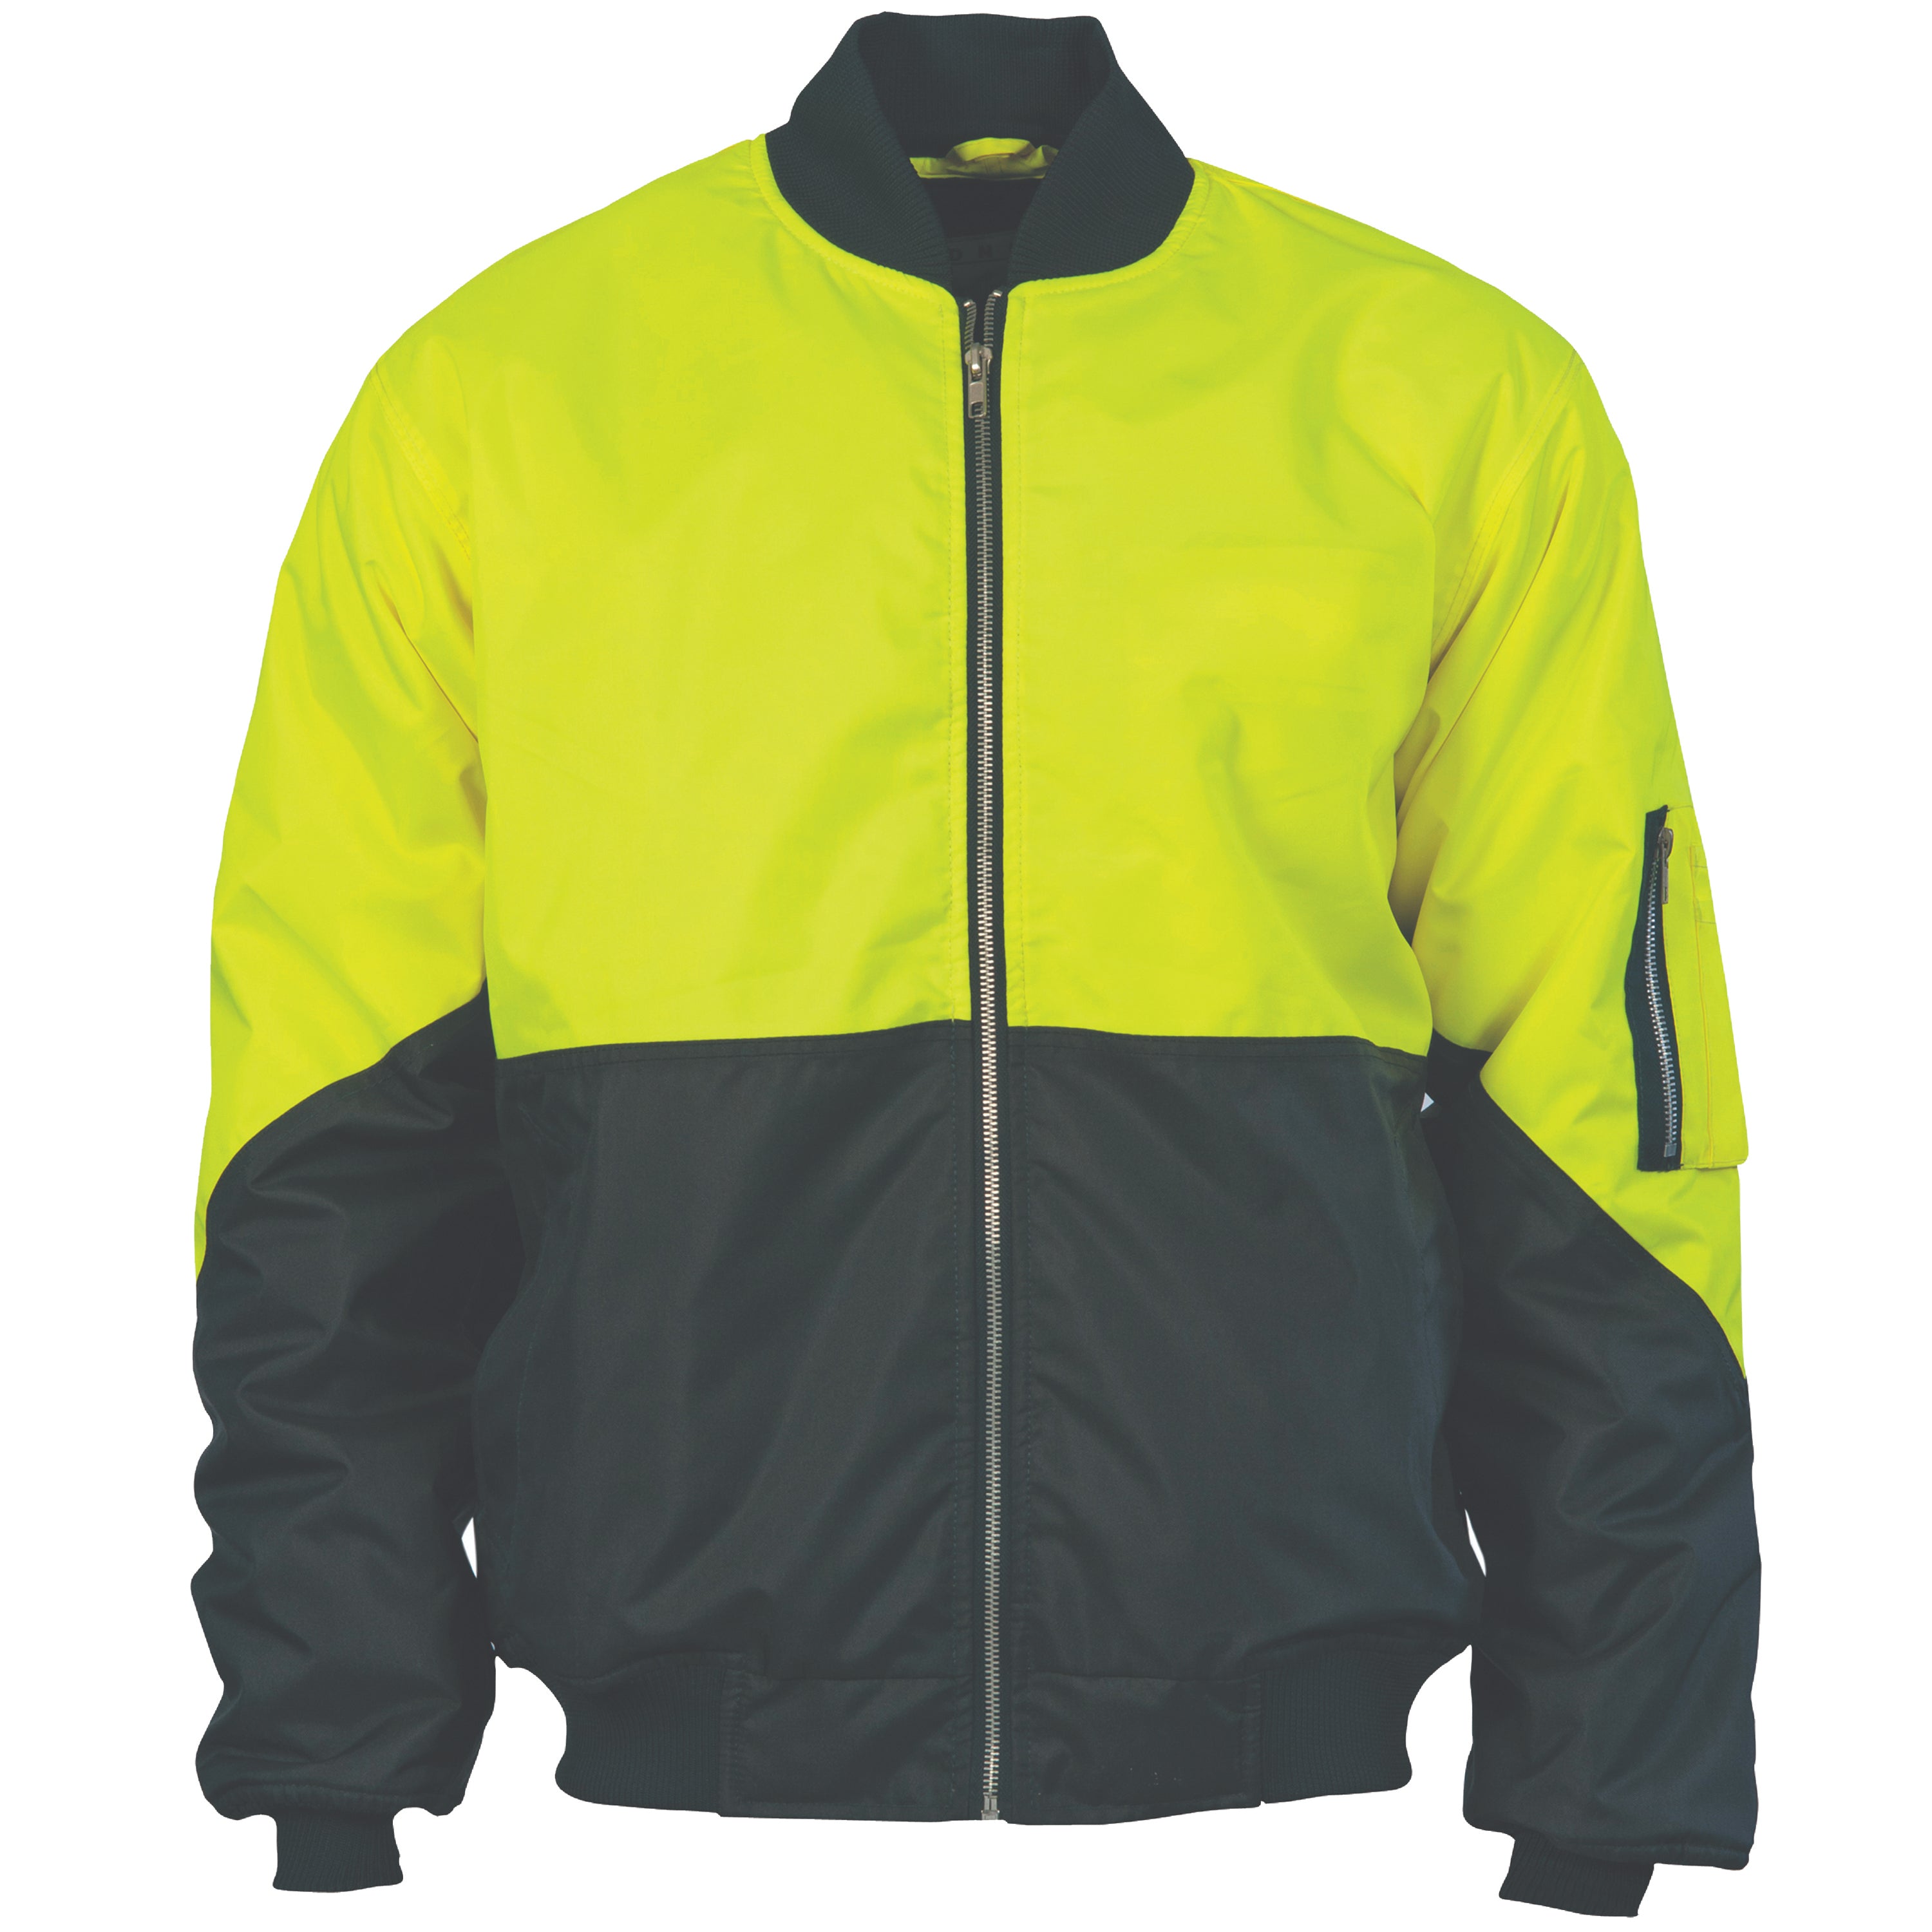 DNC 3861 HiVis Two Tone Flying Jacket